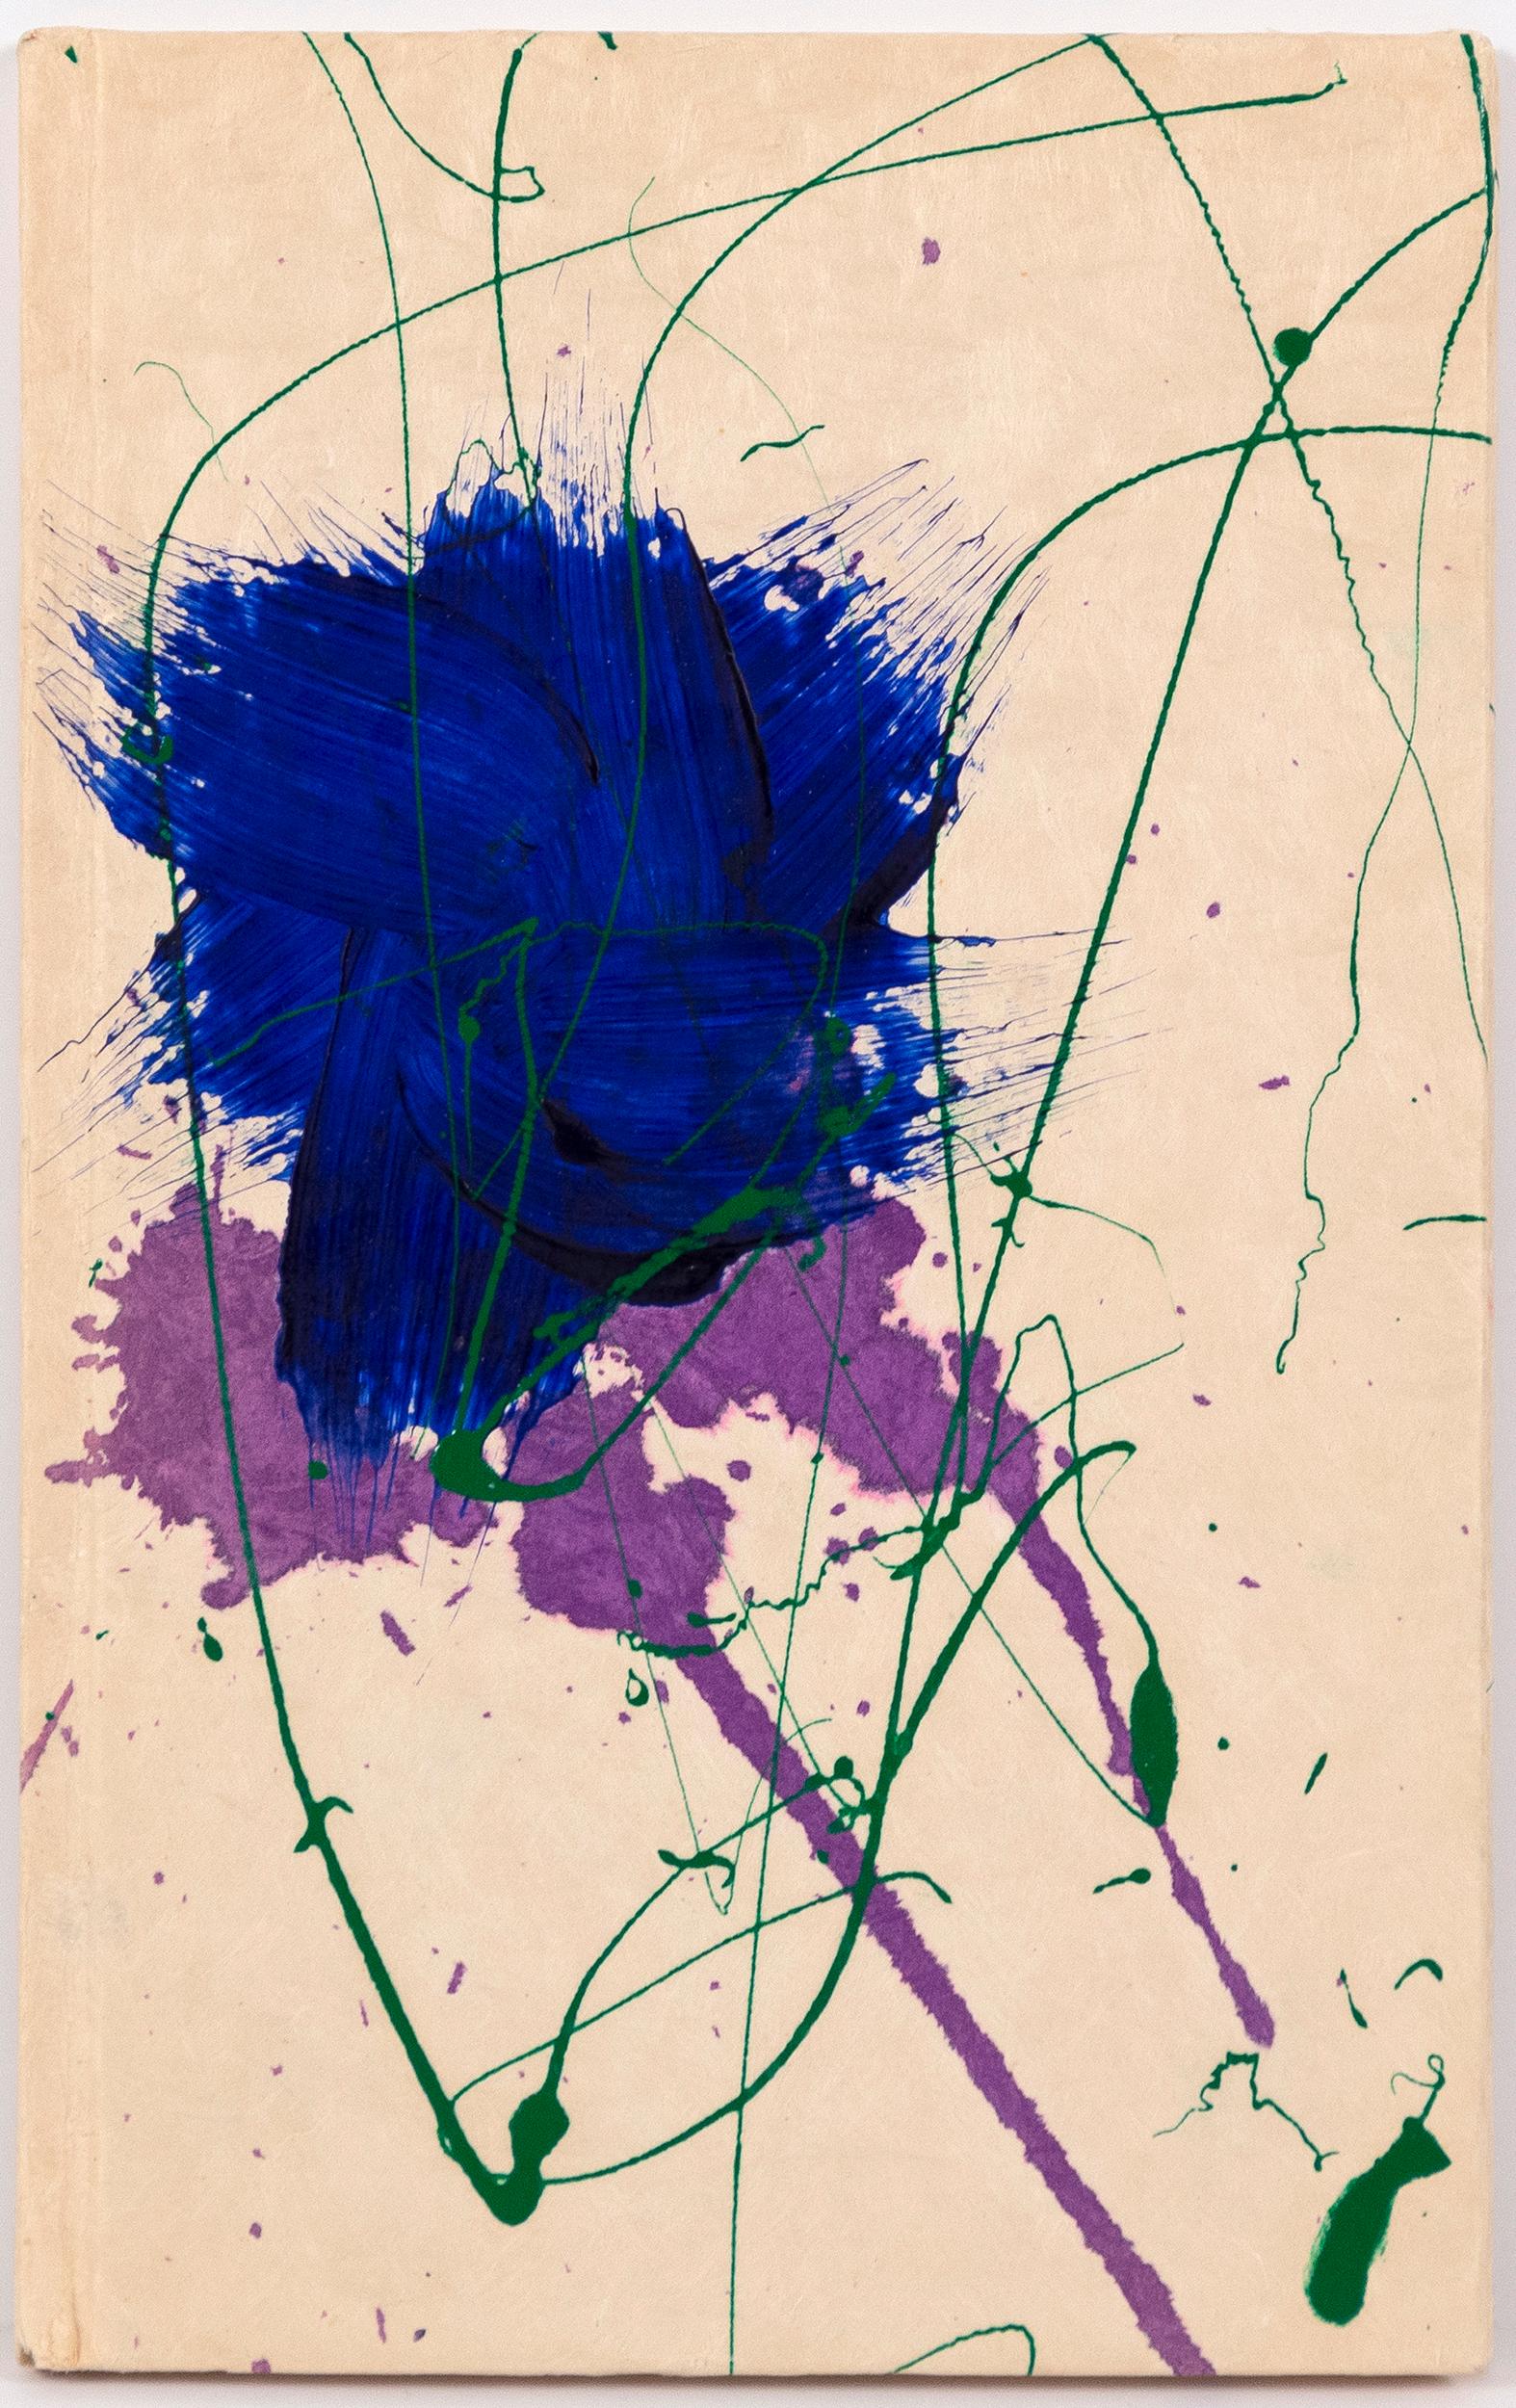 Yea II - Abstract Expressionist Painting by Sam Francis